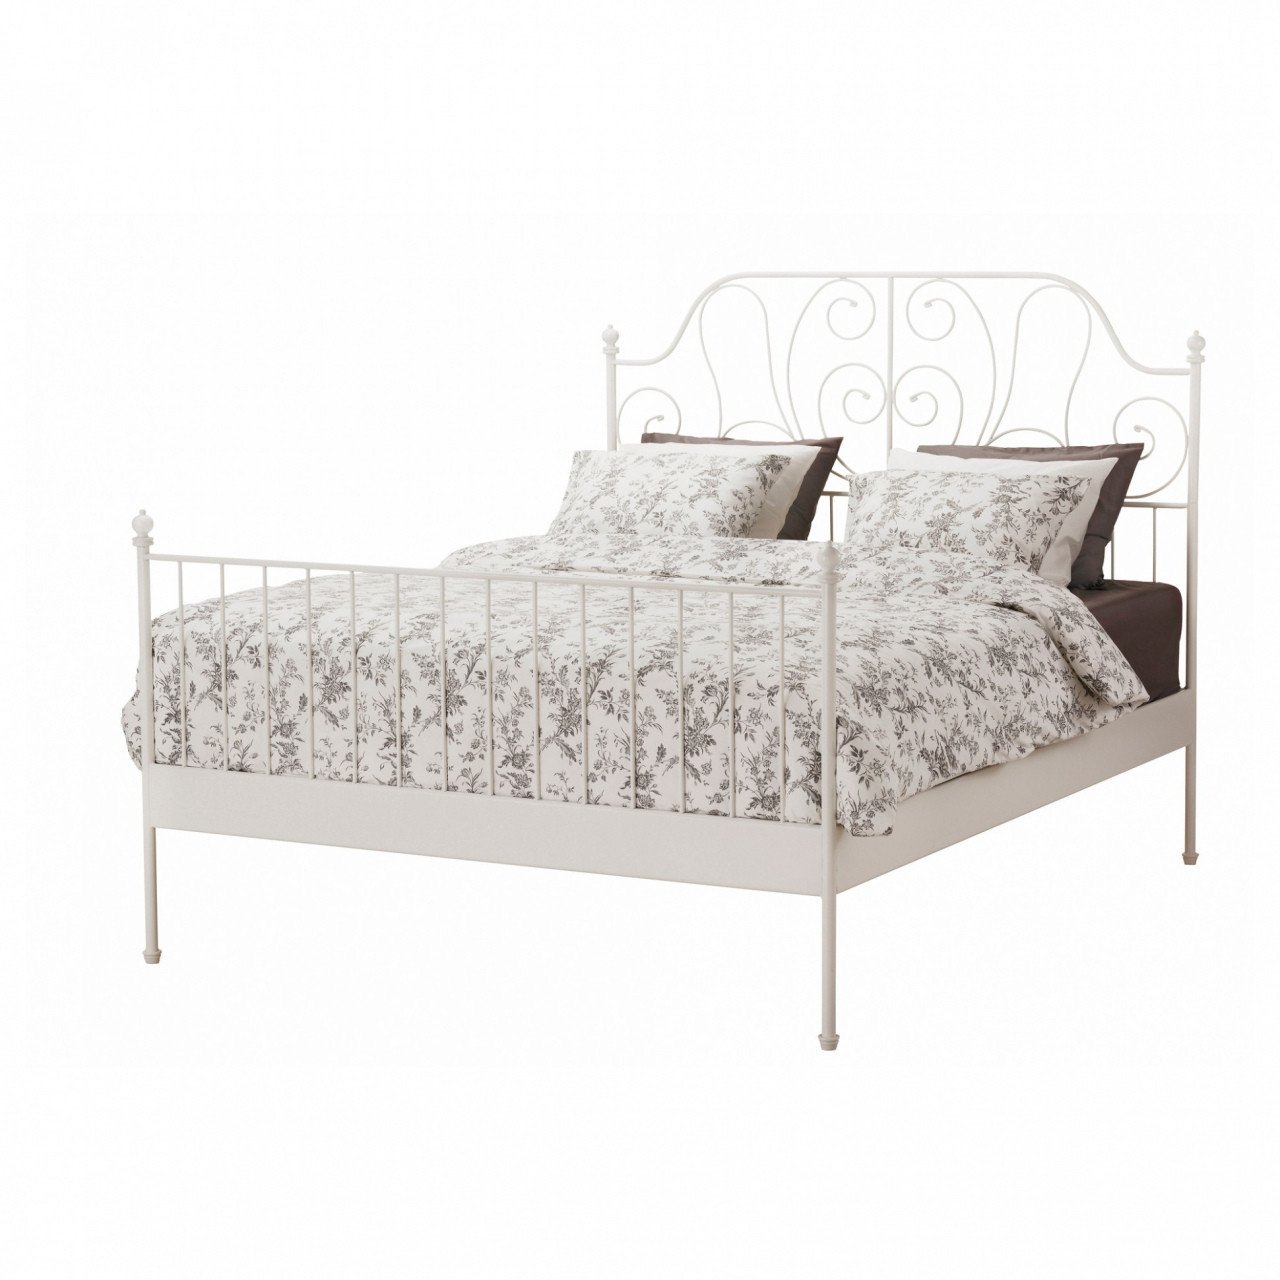 Wrought Iron Bedroom Set Best Of White Wrought Iron Bed — Procura Home Blog